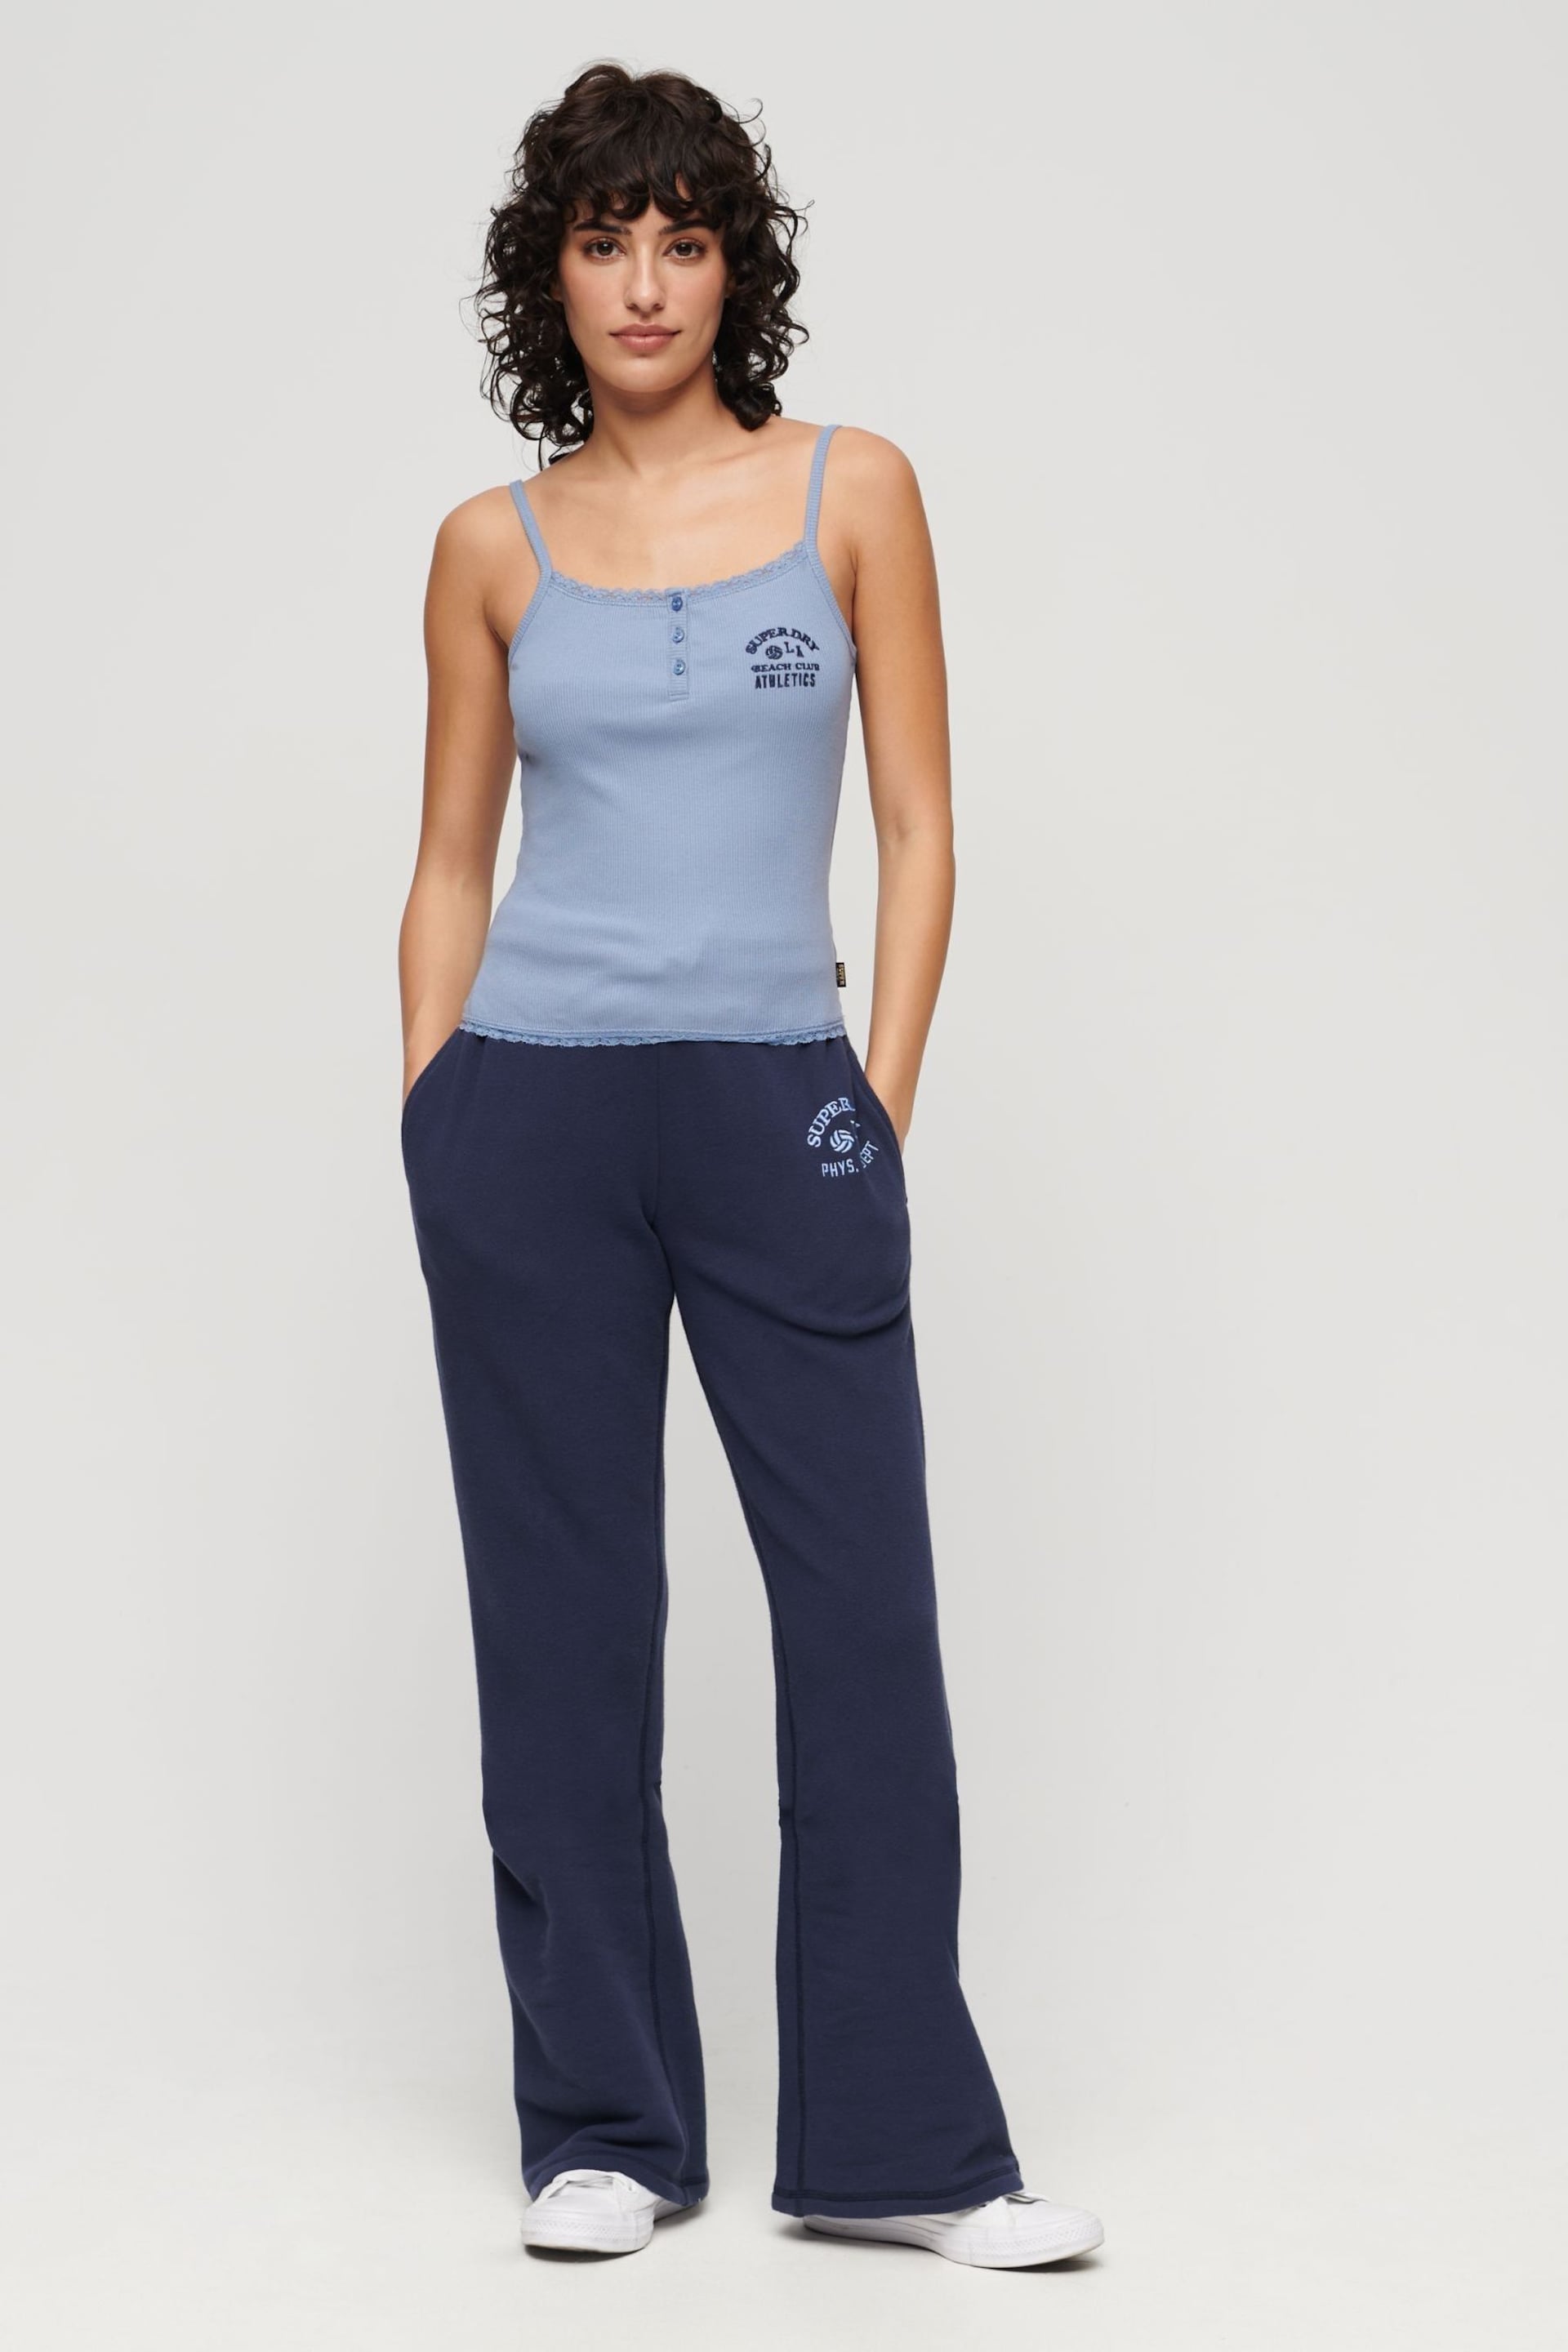 Superdry Blue Low Rise Flare Joggers - Image 2 of 6